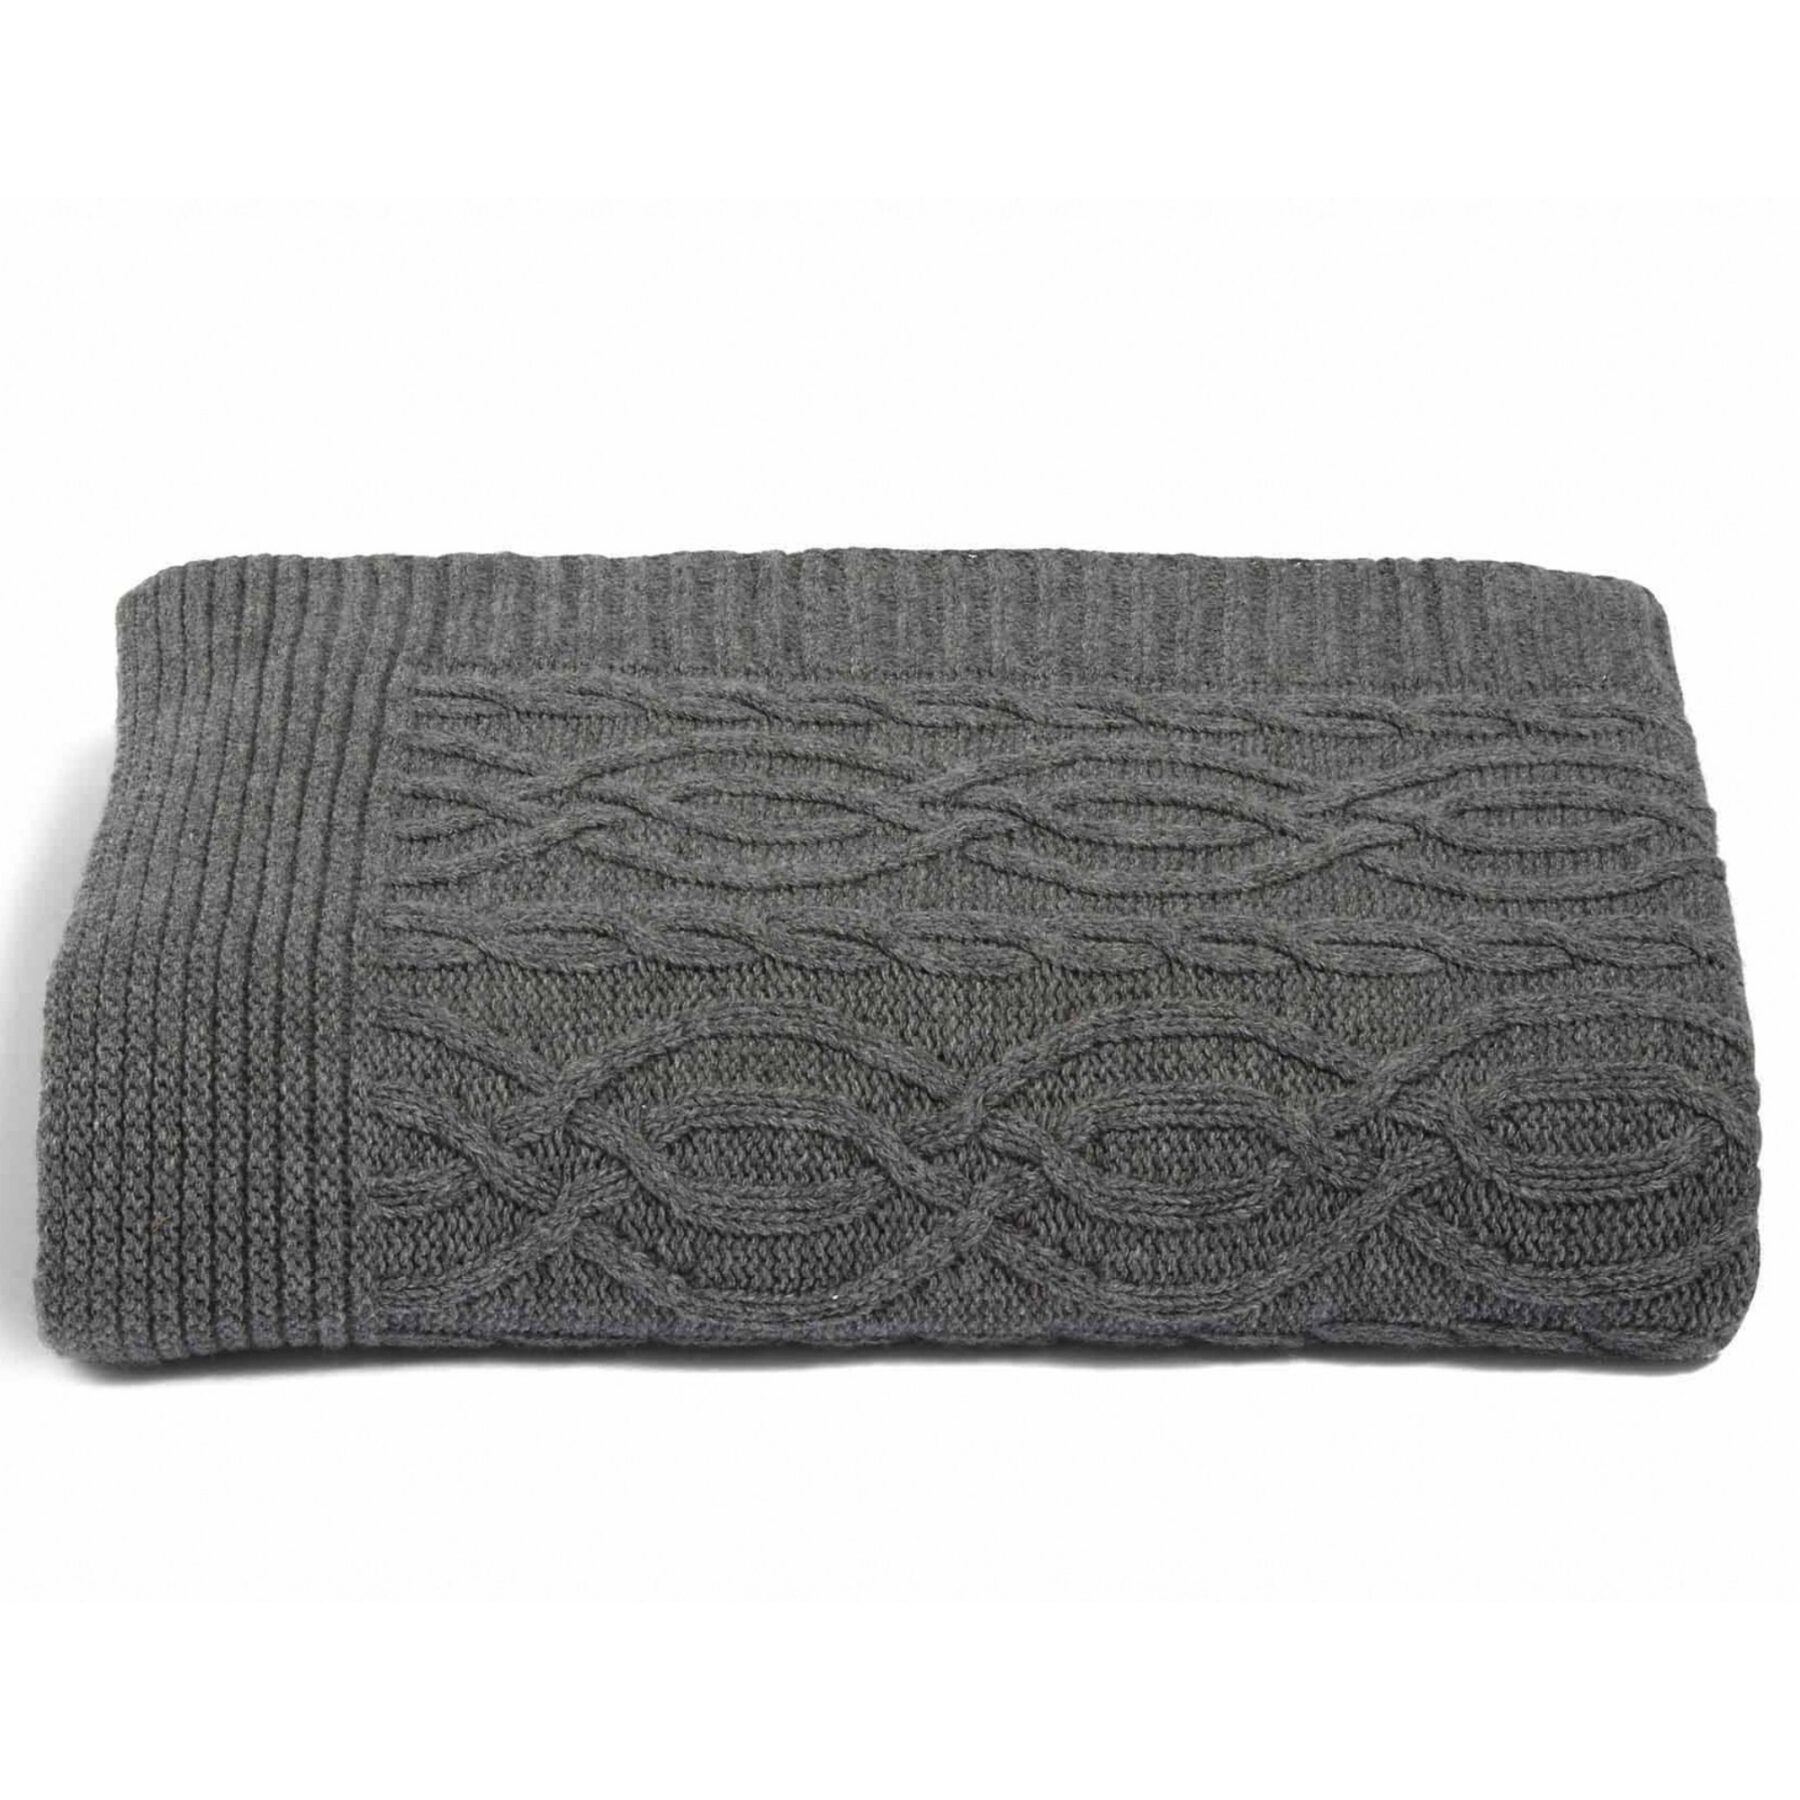 soho-house-cable-knit-throw-dim-gray-square